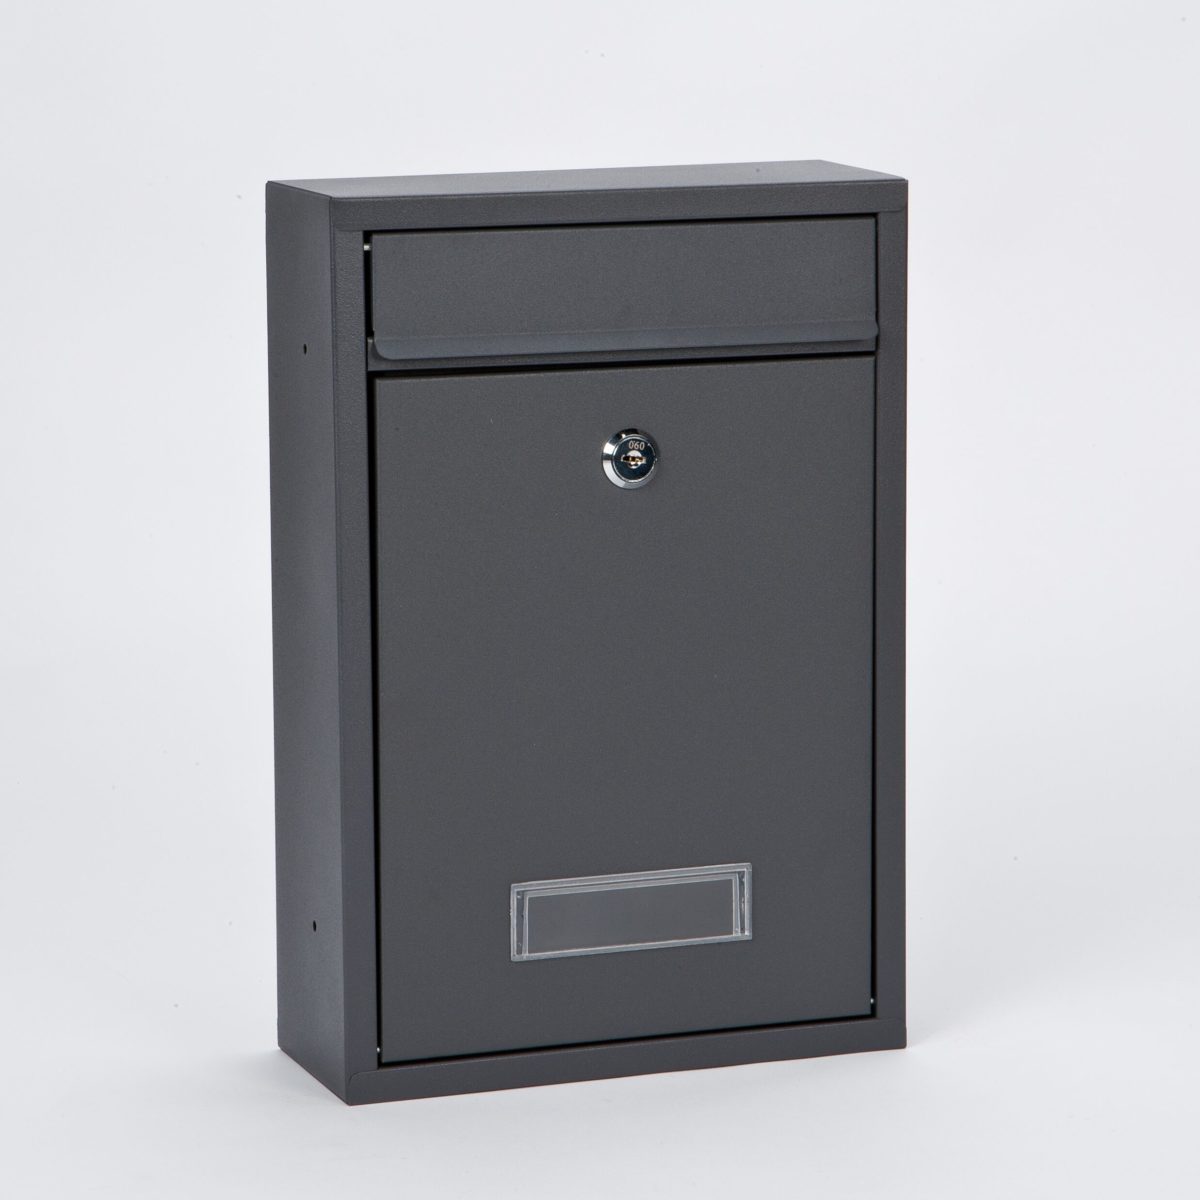 ARBORIA metal postbox grey - UK Wholesalers of Home And Garden Products